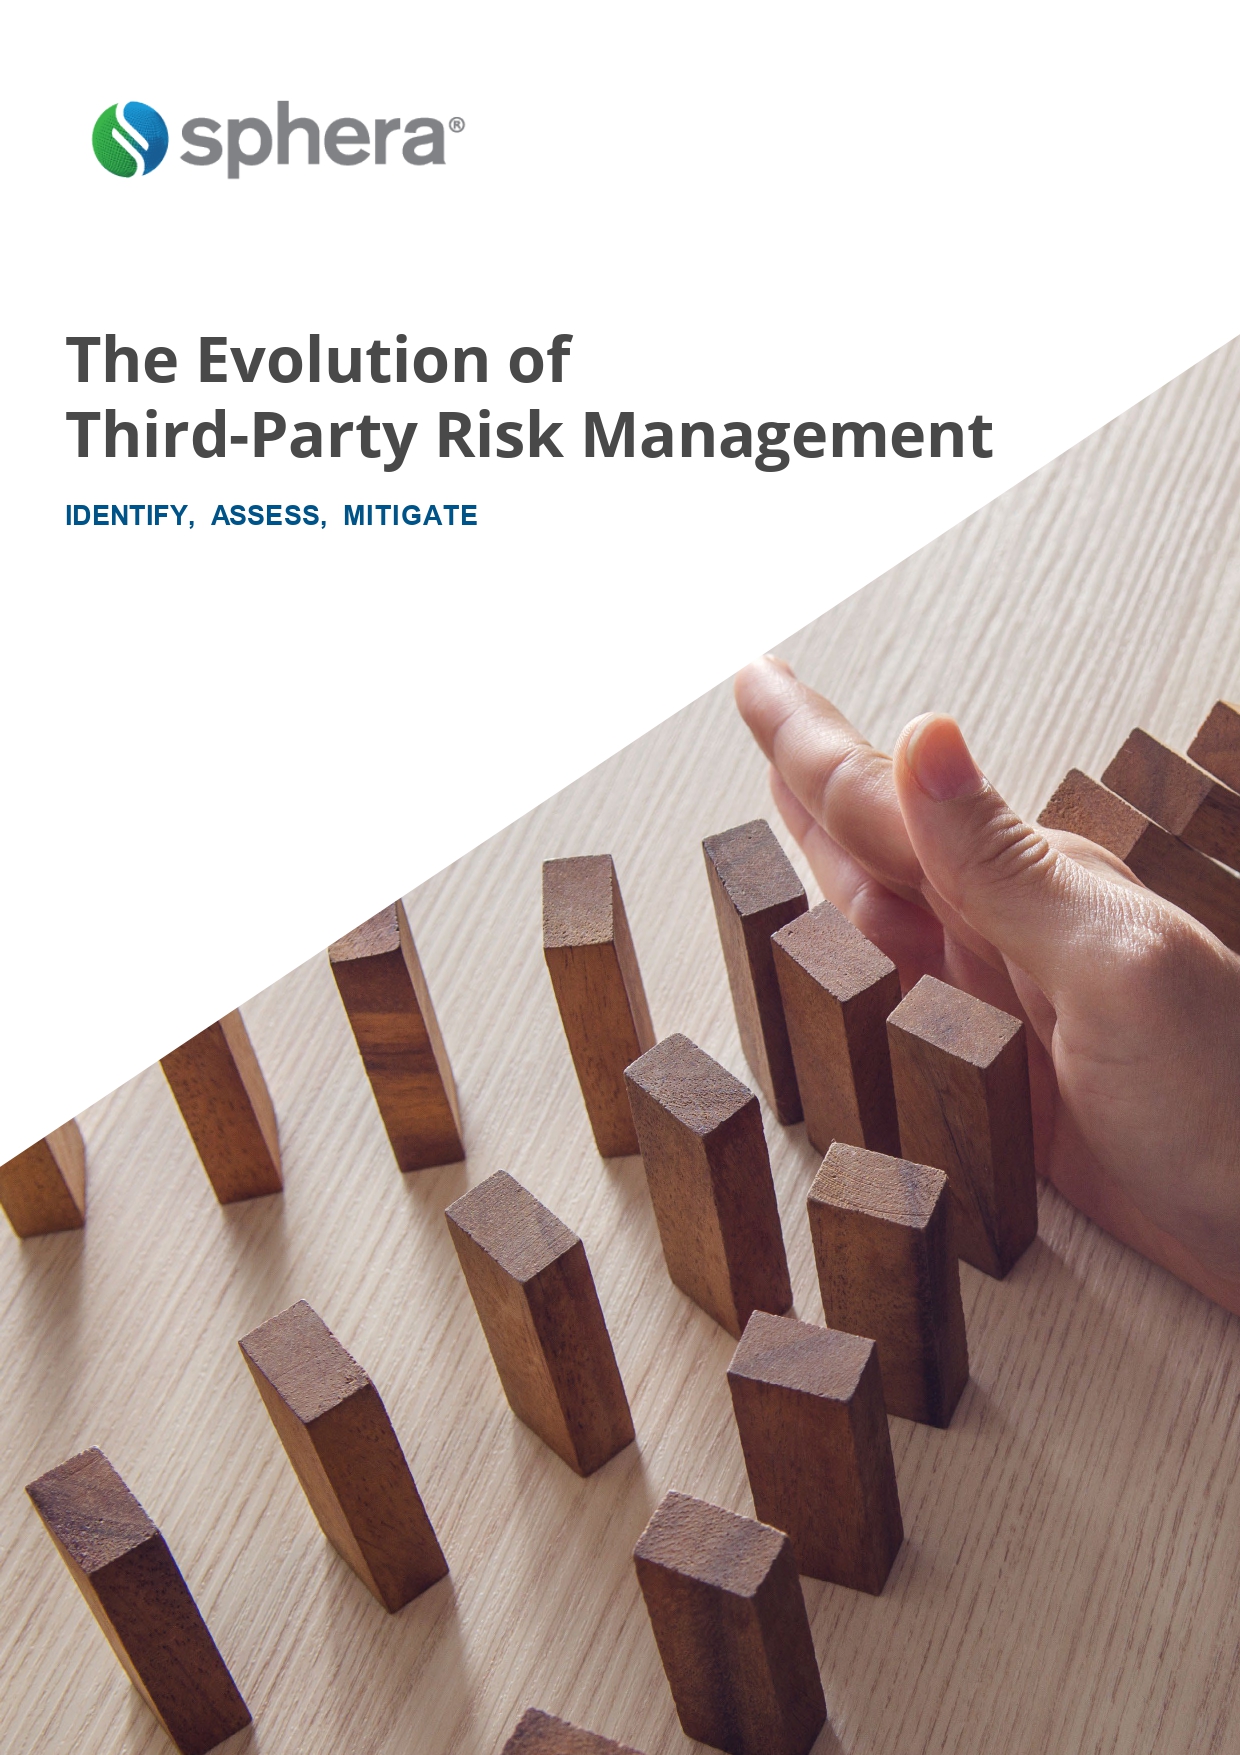 The Evolution of Third-Party Risk Management